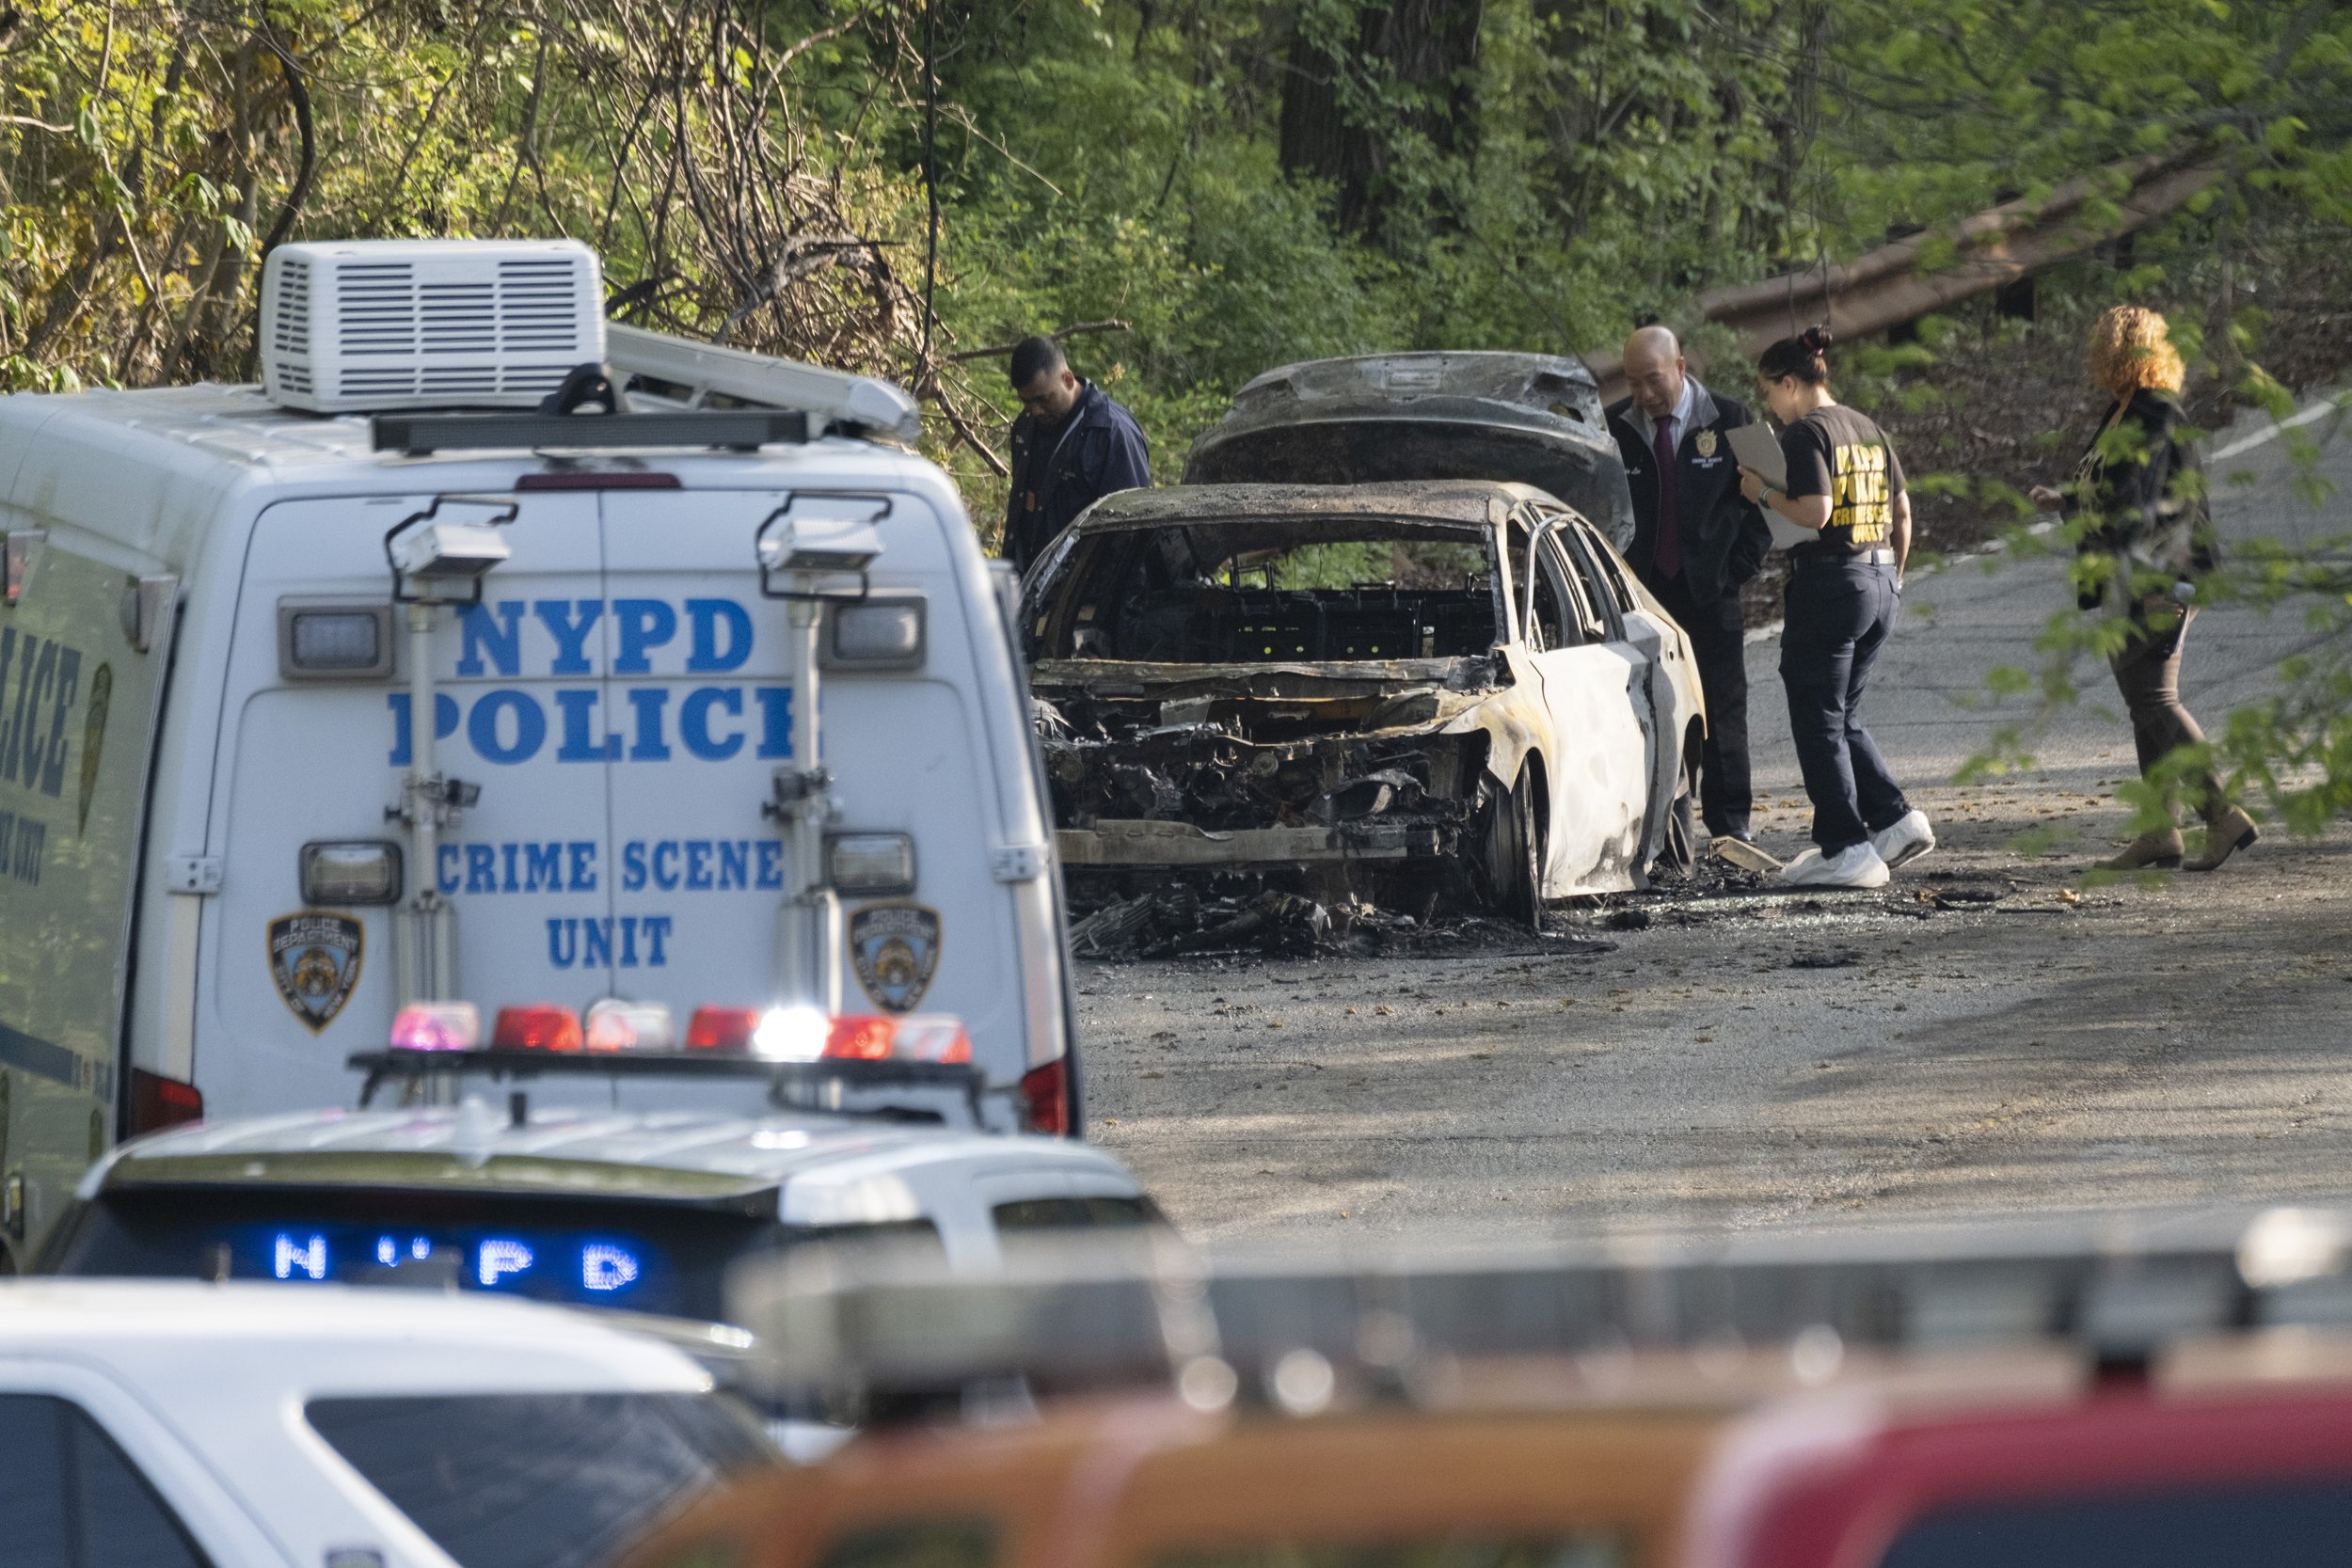  May 16th, 2022 - Bronx, NY: At approximately 4:30 a.m., firefighters responding to a fully engulfed car fire on a desolate stretch of Shore Rd., near the Westchester County border, made the grisly discovery of the bodies of Nikki Huang, 22, and Jess